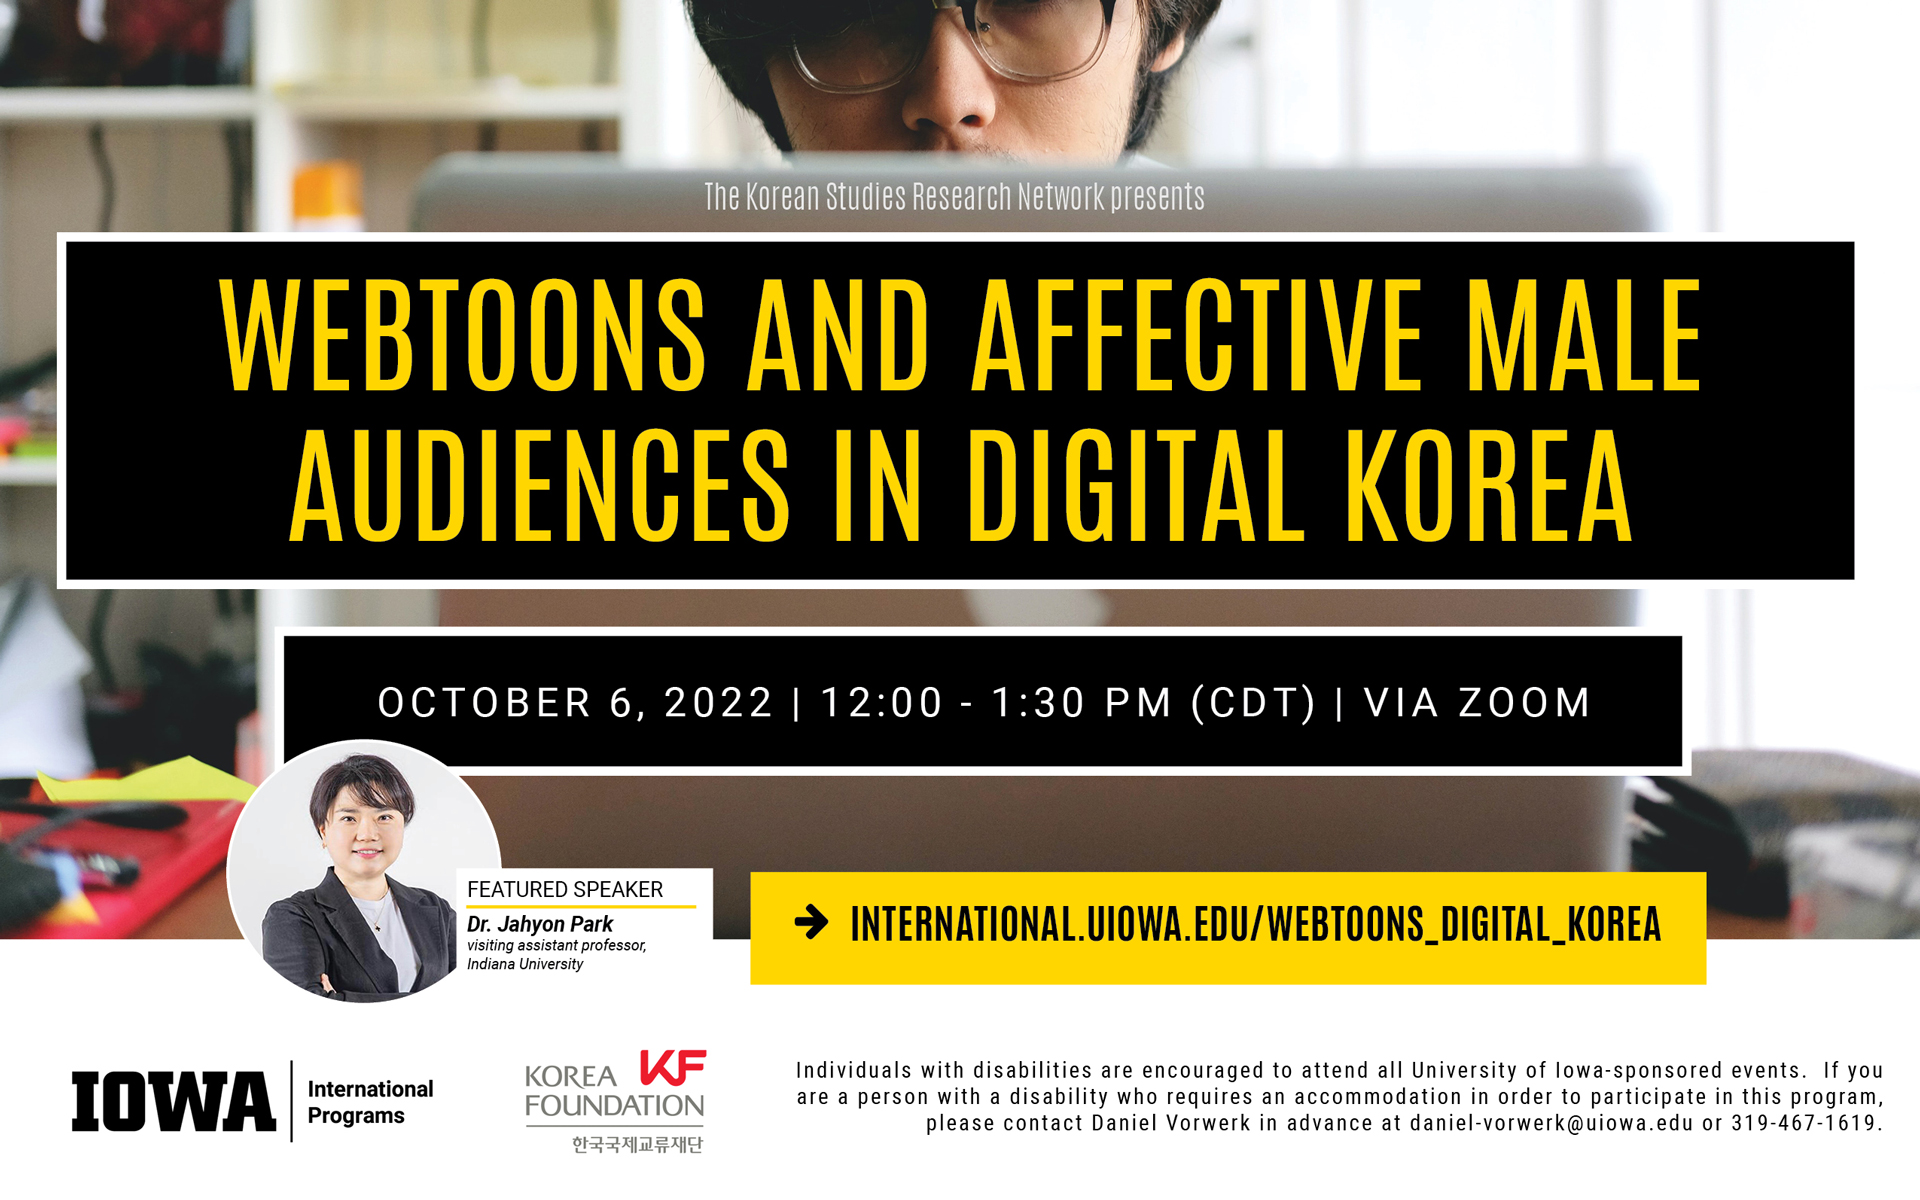 The Korean Studies Research Network presents Webtoons and Affective Male Audience in Digital Korea. Featured Speaker is Dr. Jahyon Park, visiting assistant professor, Indiana University. October 6, 2022. 12:oo - 1:30 pm (cdt), via Zoom. Visit international.uiowa.edu/webtoons_digital_korea for more information. Individuals with disabilities are encouraged to attend all University of Iowa-sponsored events. If you are a person with a disability who requires an accommodation in order to participate in this program, please contact Daniel Vorwerk in advance at daniel-vorwerk@uiowa.edu or 319-467-1619.  